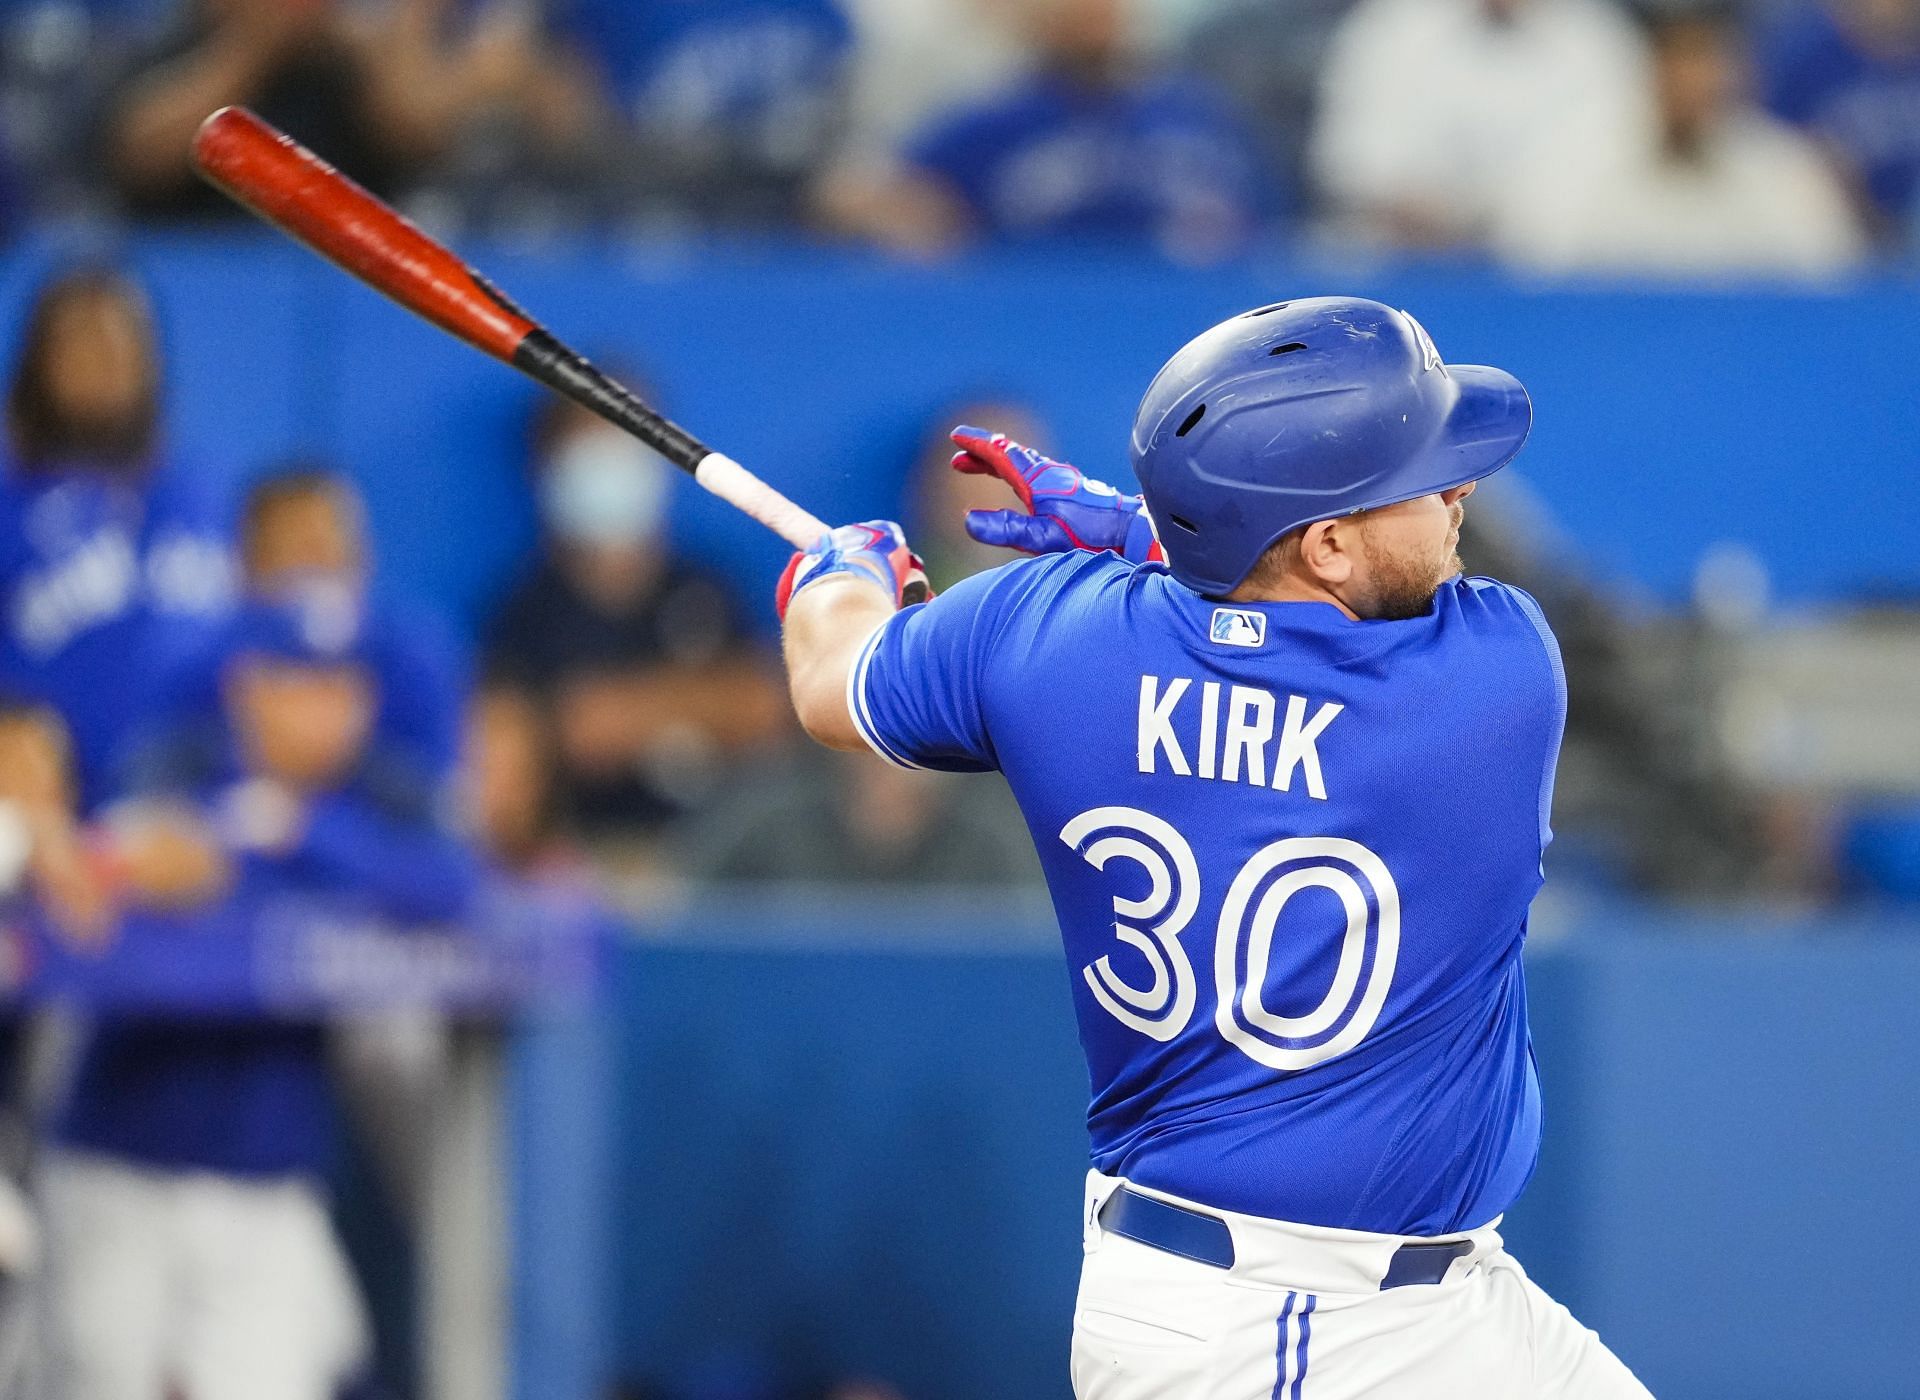 Toronto Blue Jays catcher Alejandro Kirk is hitting .319 this season and .387 in his last 37 plate appearances.